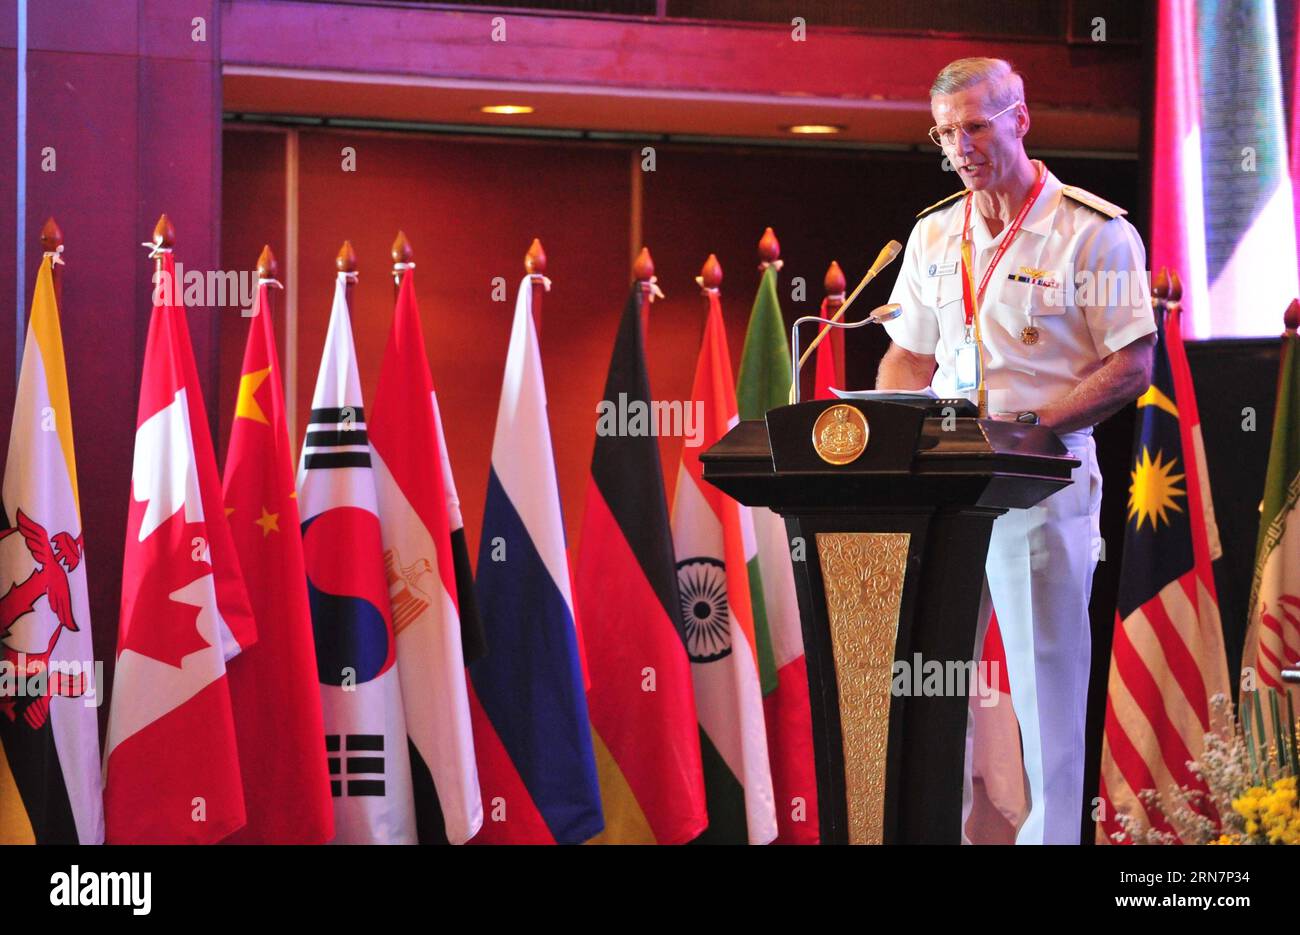 (150916) -- JAKARTA, Sept. 16, 2015 -- Commander of the U.S. 7th Fleet Joseph P. Aucoin delivers a speech during the 2nd International Maritime Security Symposium in Jakarta, Indonesia, Sept. 16, 2015. Navy officials from 42 countries and regions attended the symposium with the theme of Maritime Confidence Building and Mutual Cooperation for Peace and Prosperity from Sept. 16 to 17. ) INDONESIA-JAKARTA-INTERNATIONAL MARITIME SECURITY SYMPOSIUM Zulkarnain PUBLICATIONxNOTxINxCHN   Jakarta Sept 16 2015 Commander of The U S 7th Fleet Joseph P Aucoin delivers a Speech during The 2nd International M Stock Photo